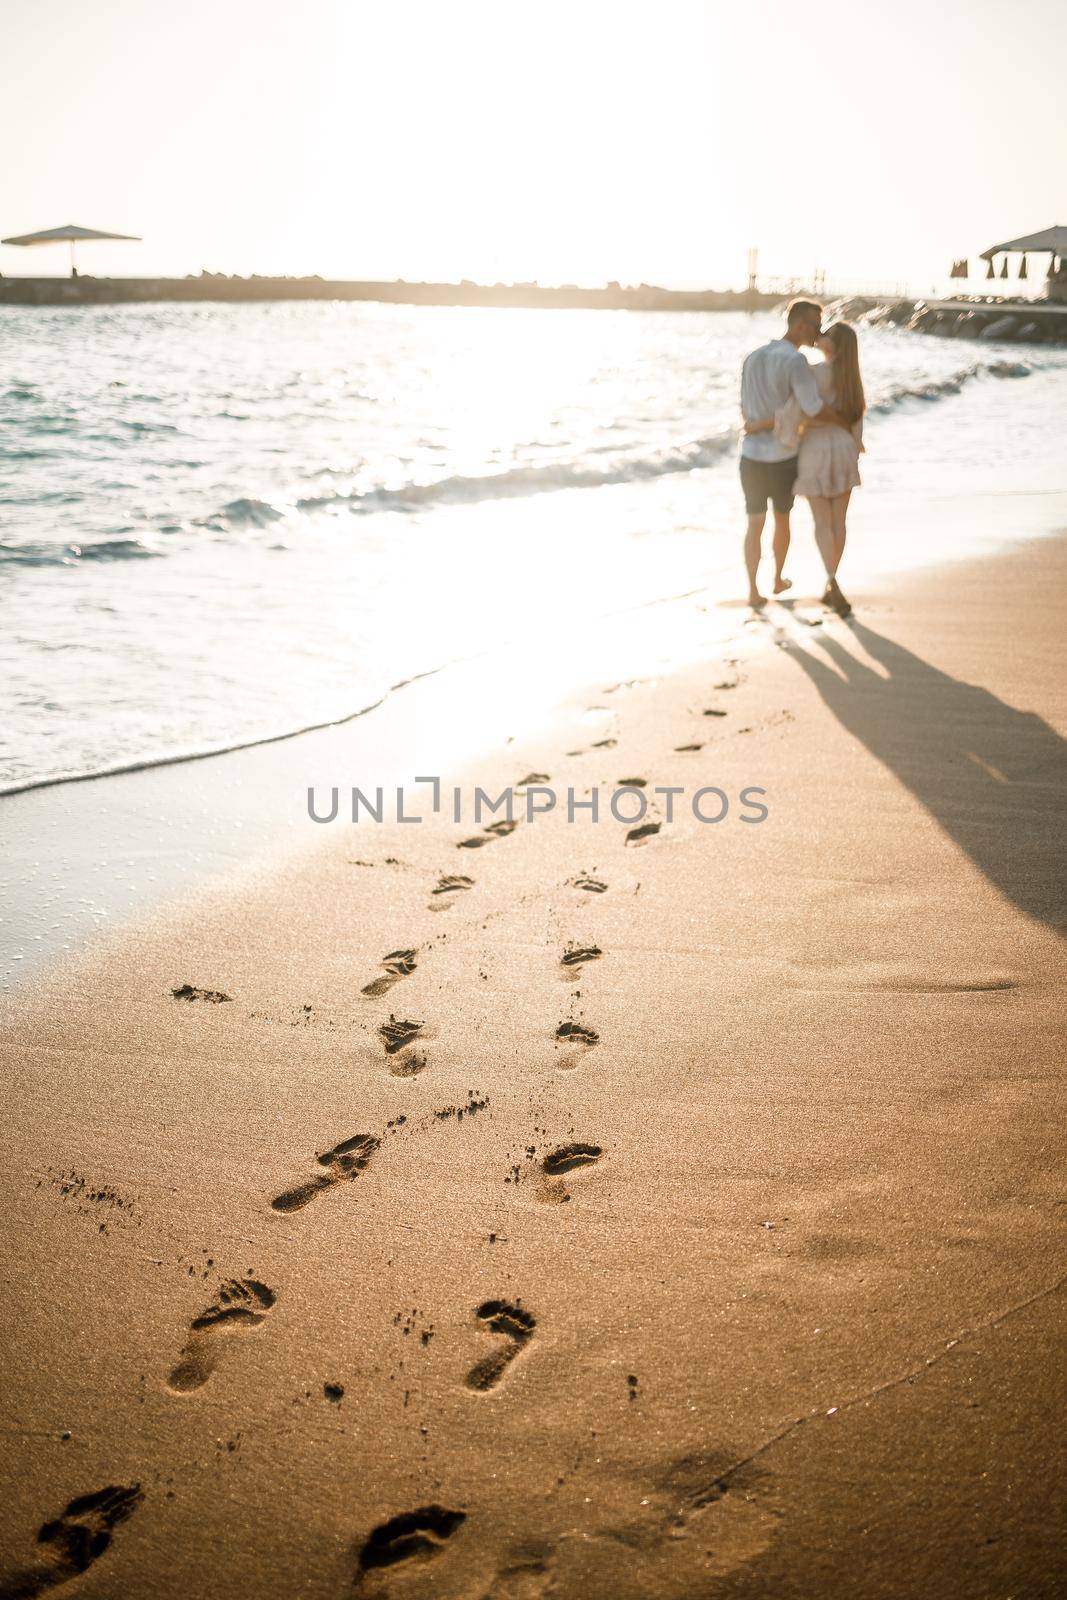 Summer holidays and travel. Sexy woman and man in sea water at sunset. Loving couple relax on the sunrise beach. Love relationship of a couple enjoying a summer day together. Selective focus by Dmitrytph